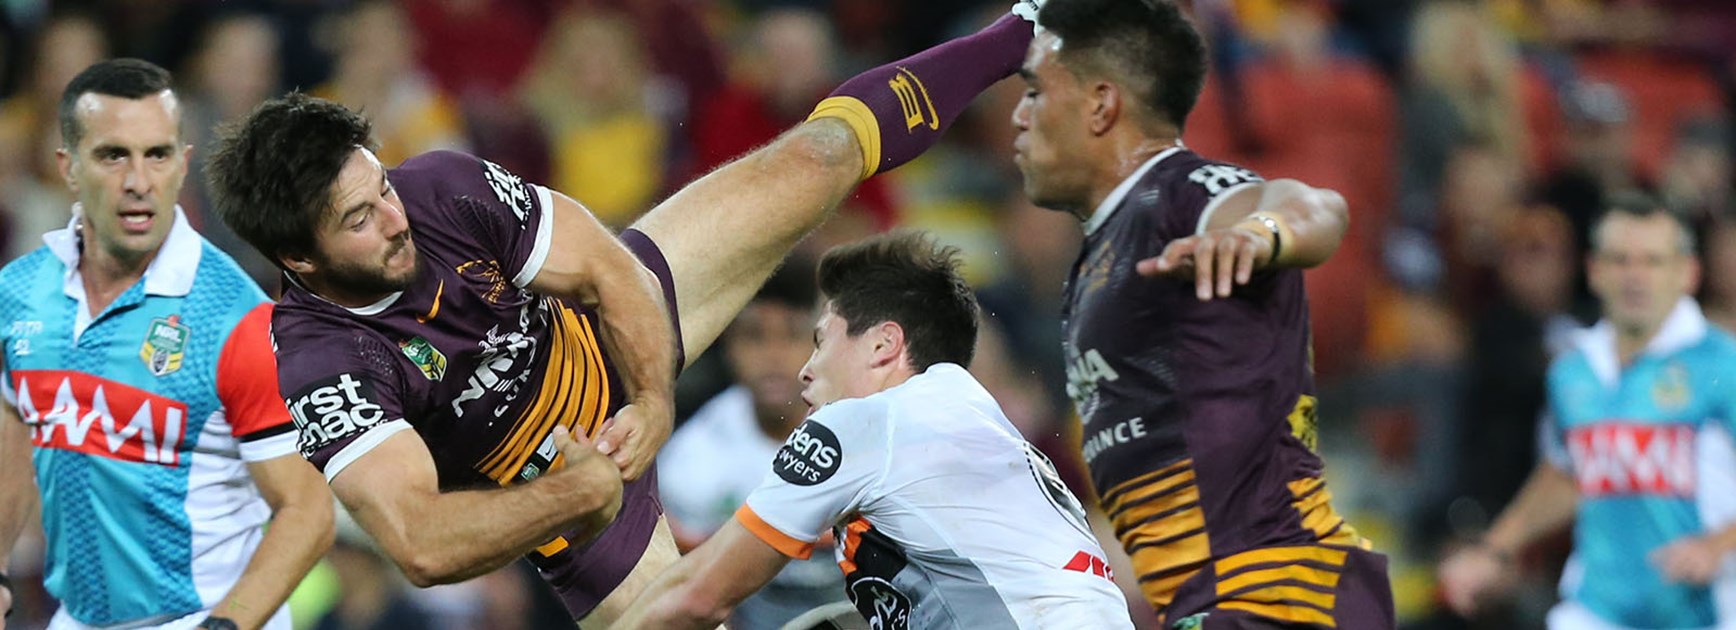 Ben Hunt comes up with a spectacular try saving play on Mitch Moses at Suncorp Stadium.